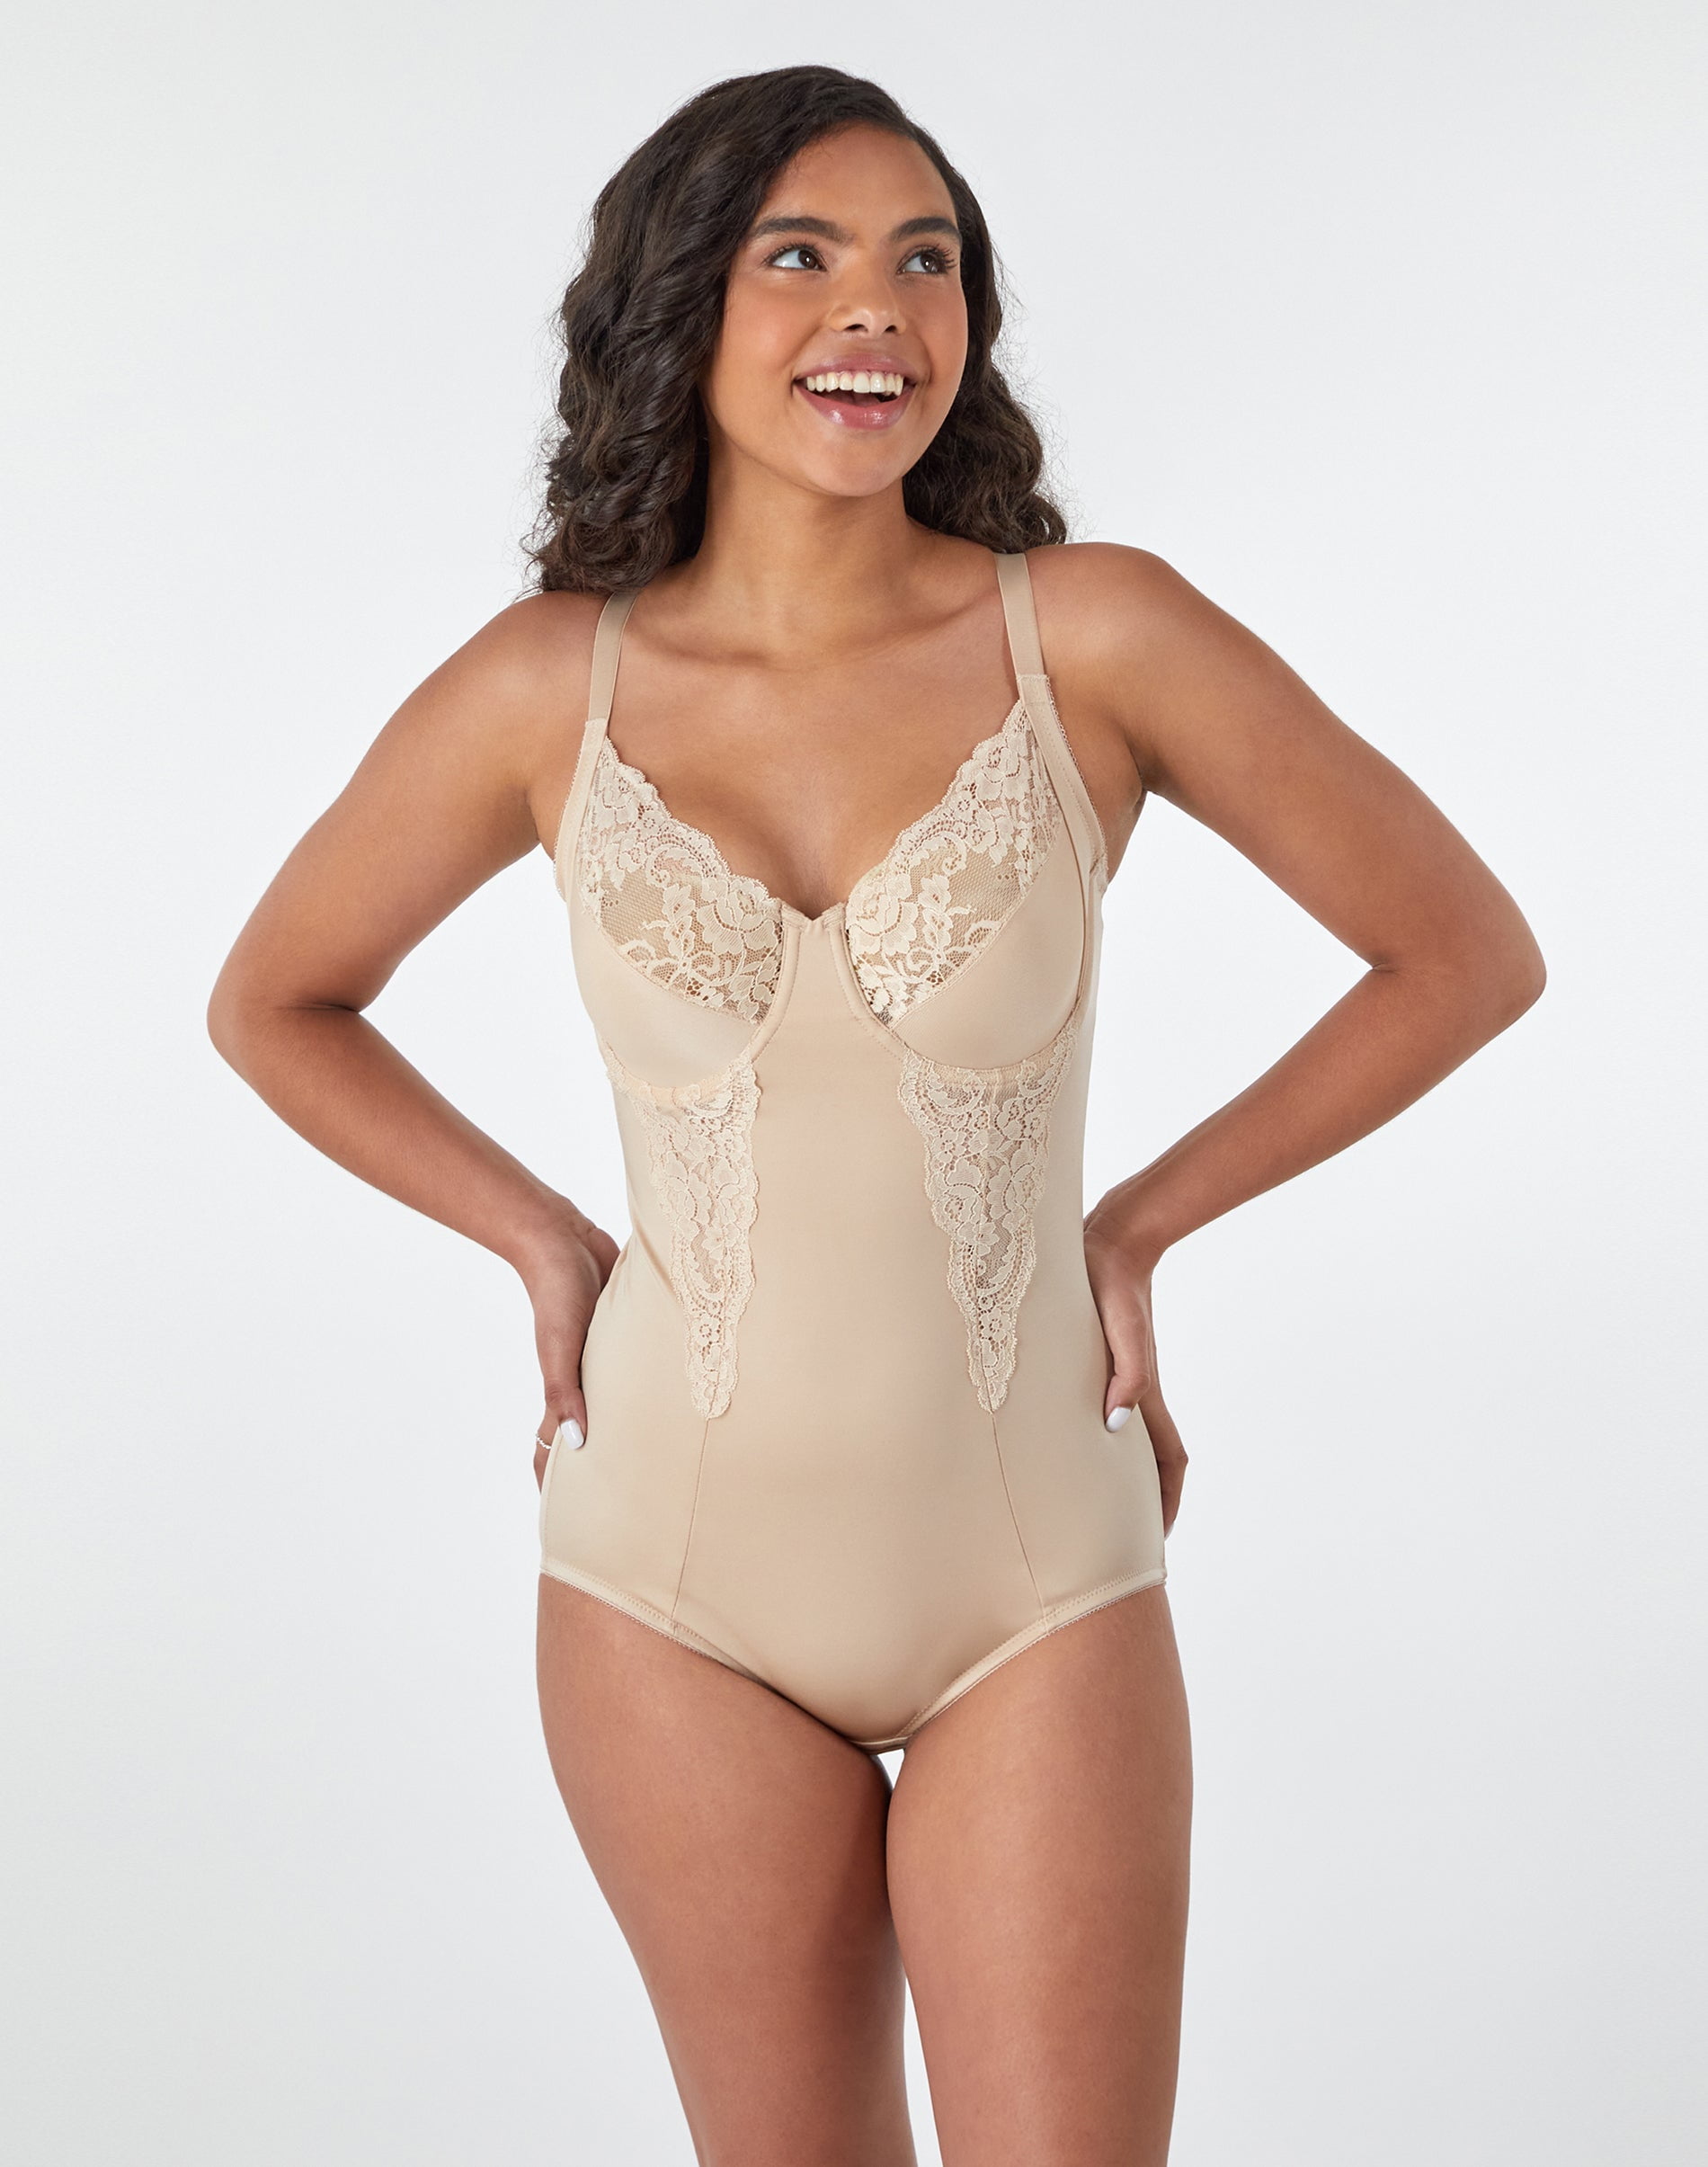 Maidenform Womens Flexees Embellished Firm Control Bodysuit Style-1456 